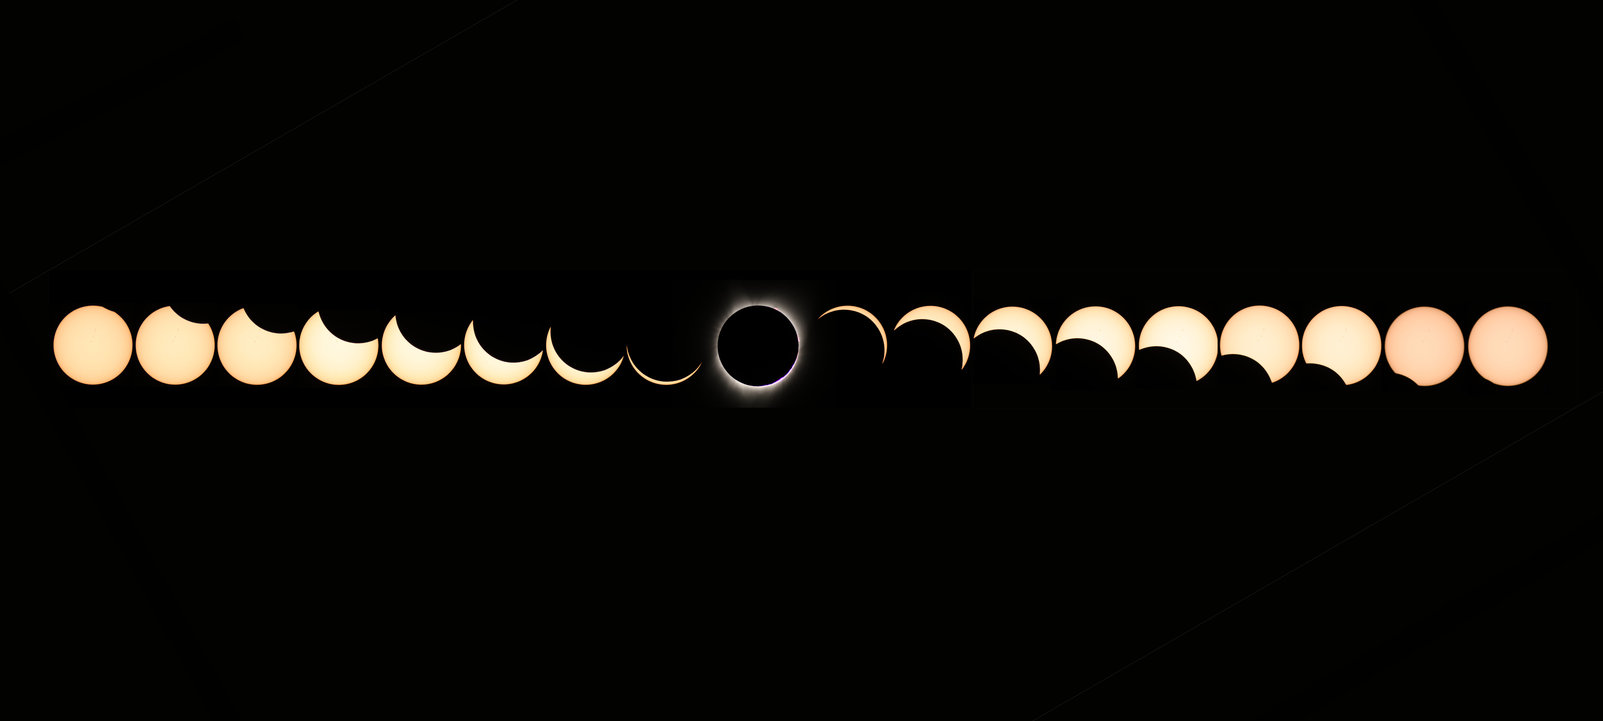 Missing eclipse